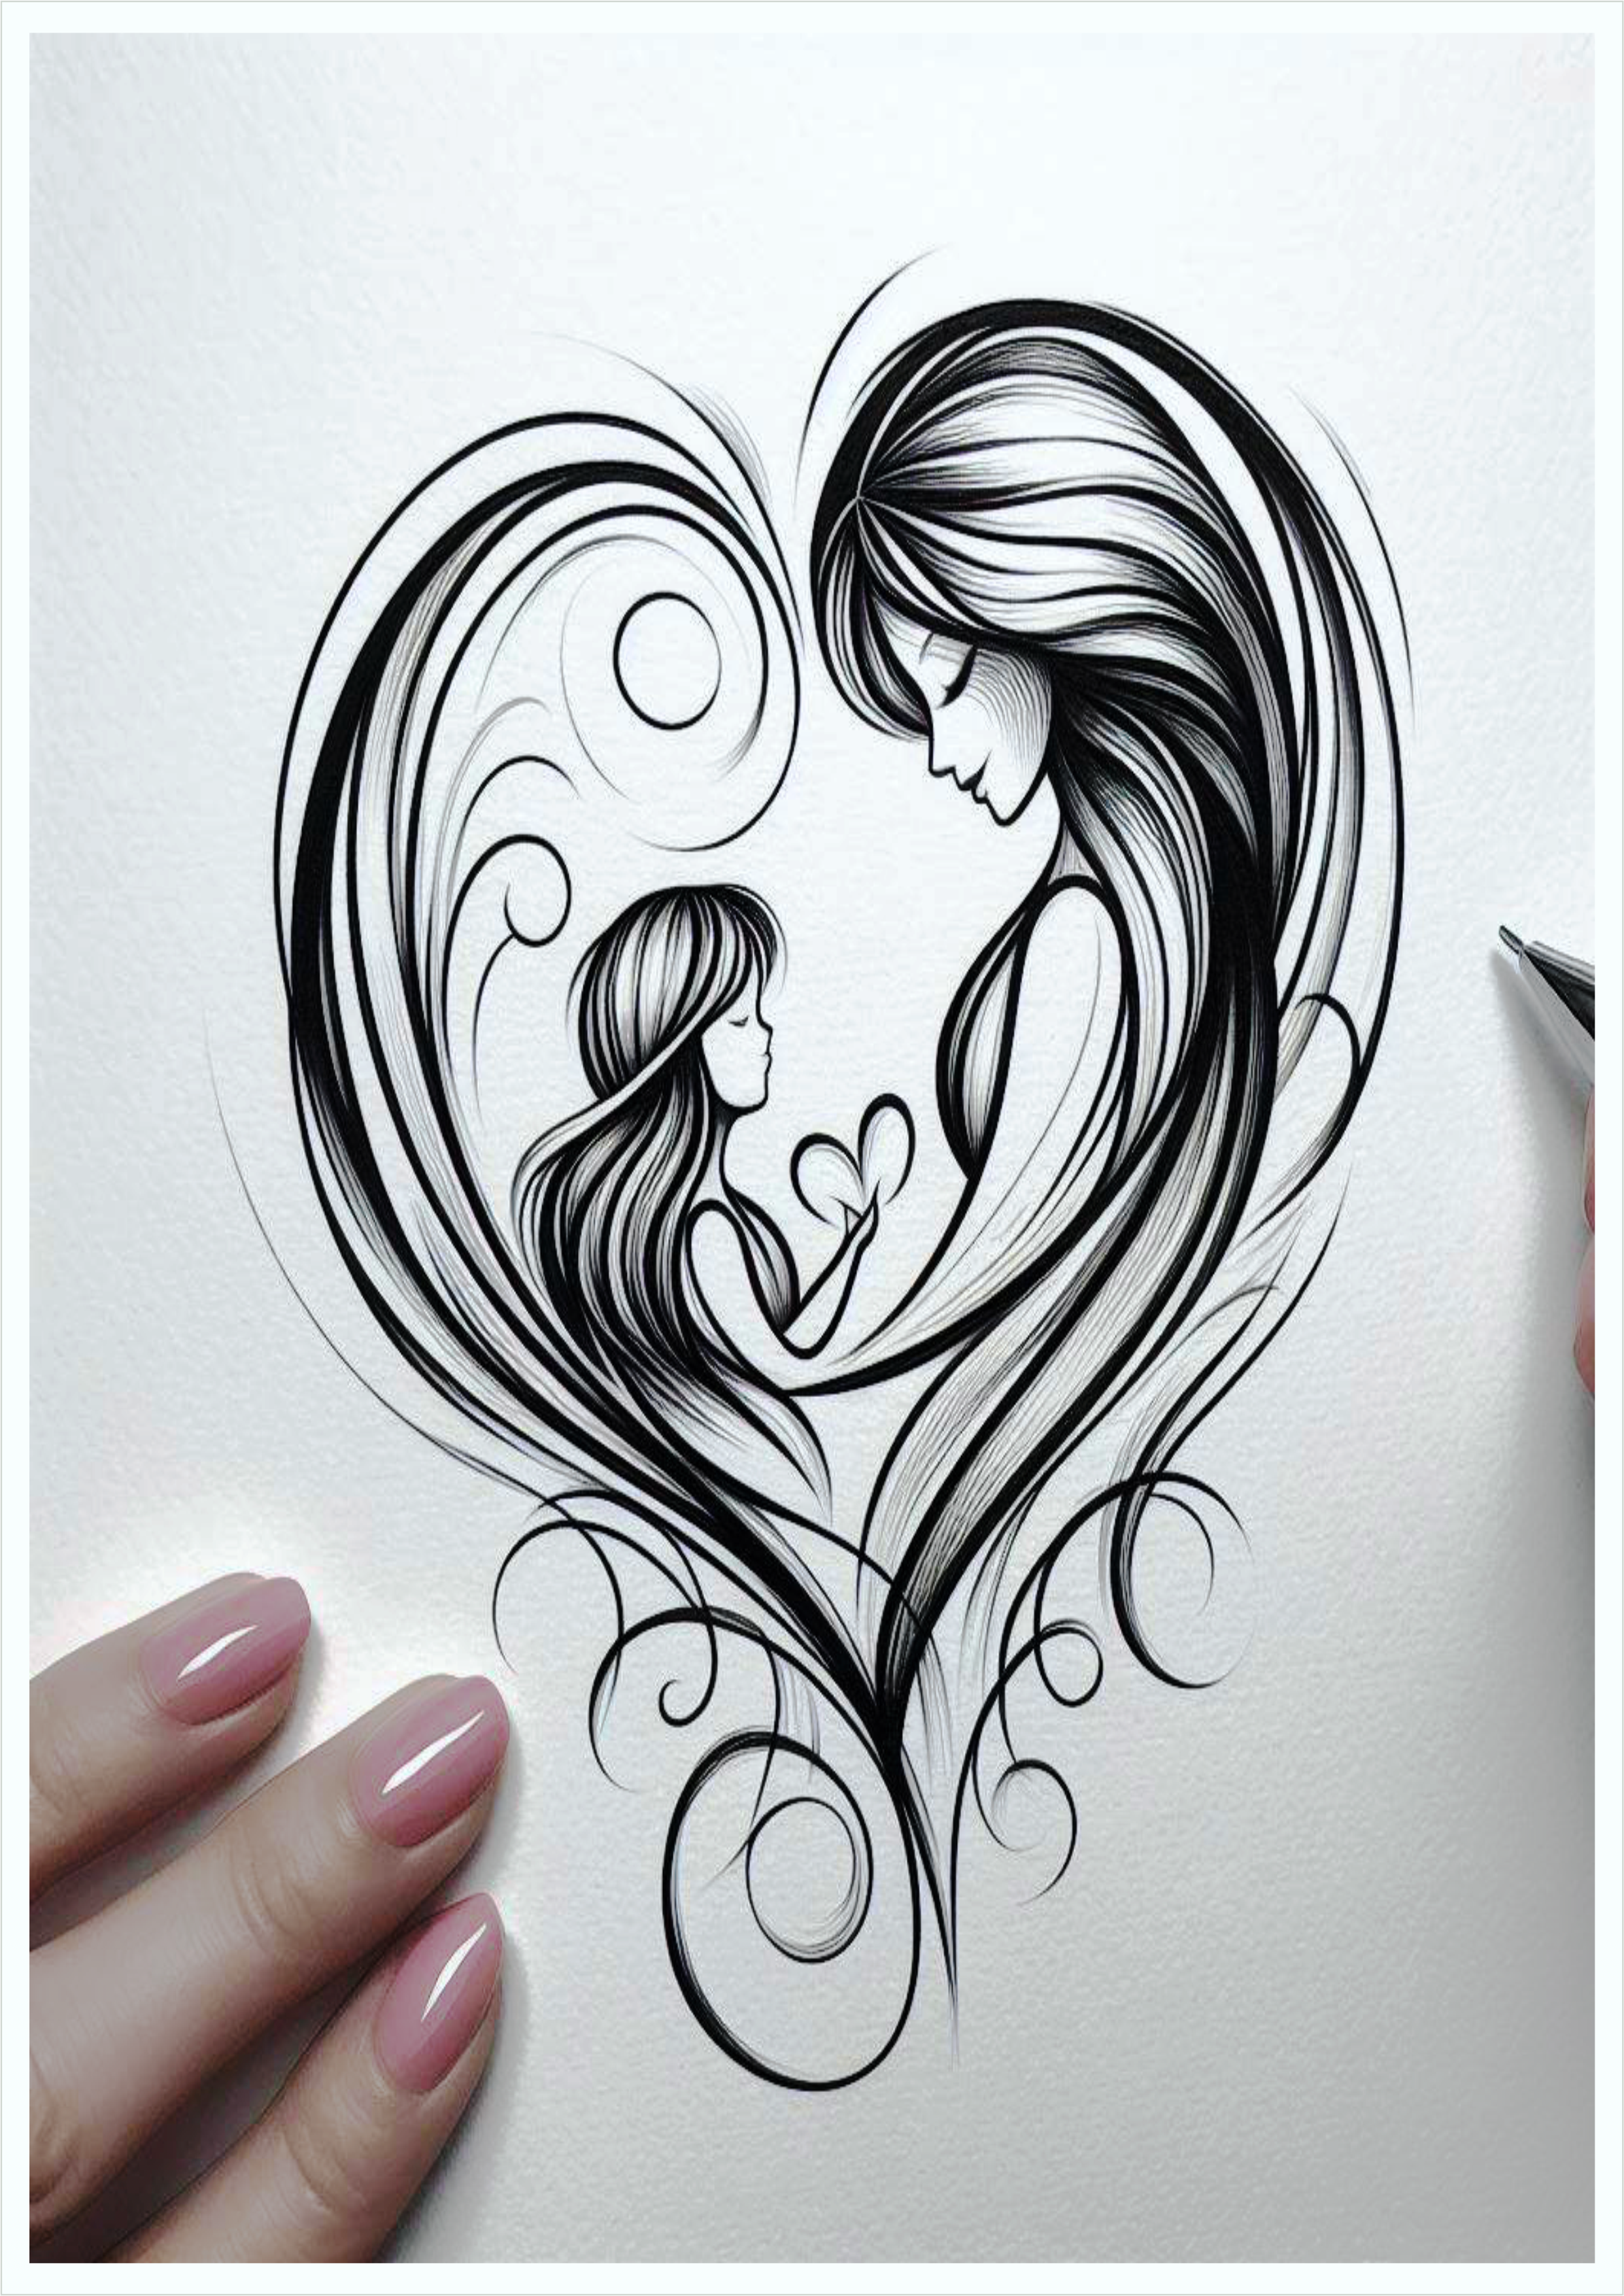 ideas for female tattoo PNG simple design mother and daughter in heart shape image pack free download studio graphic arts designer